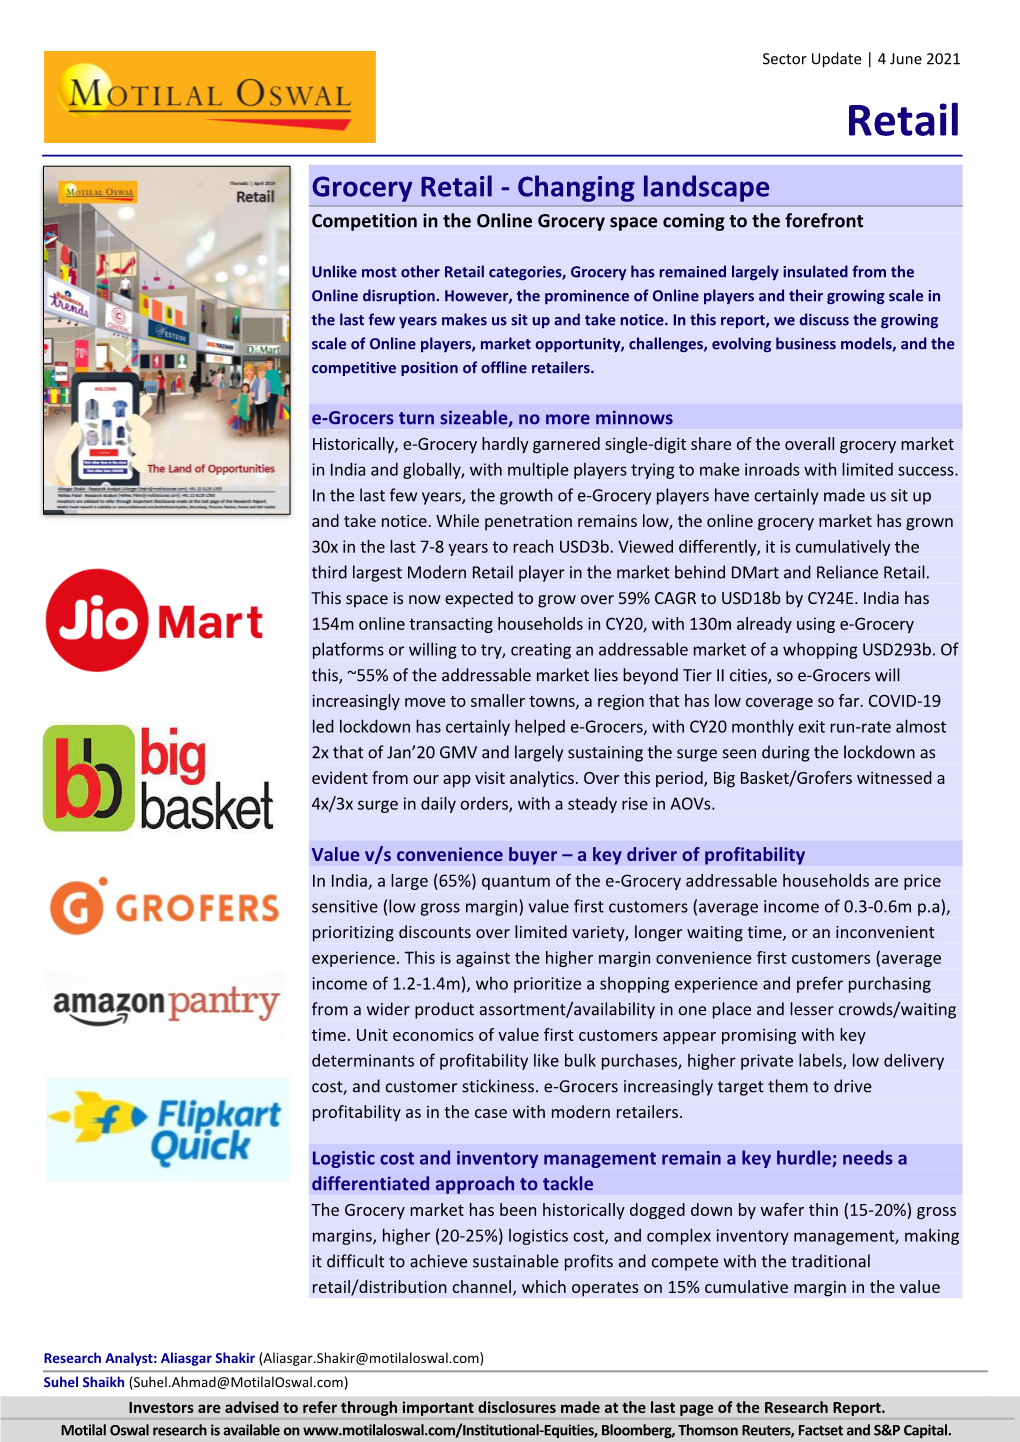 Grocery Retail - Changing Landscape Competition in the Online Grocery Space Coming to the Forefront